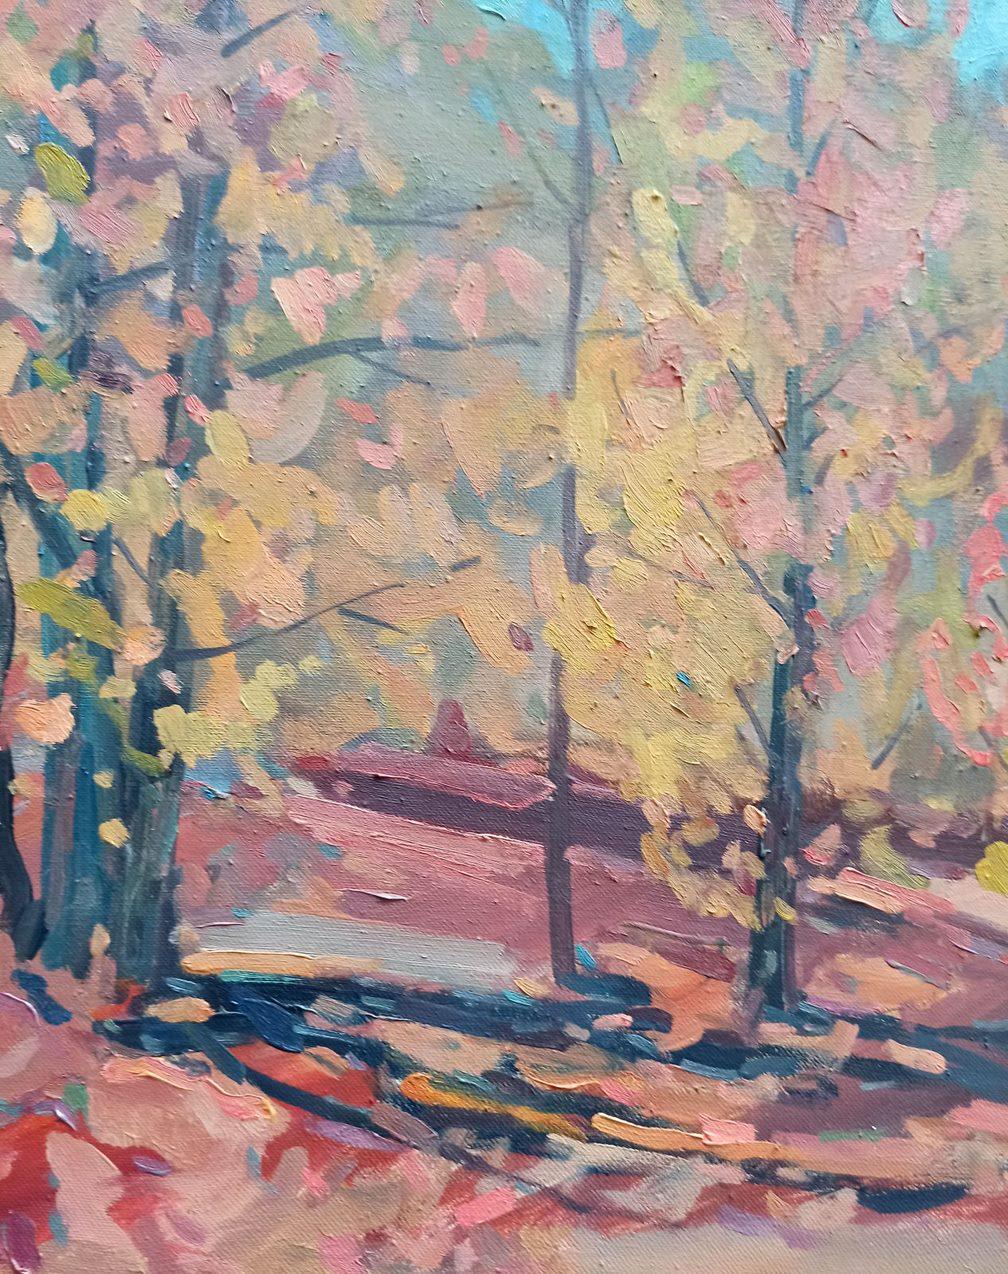 Artist: Peter Tovpev
Work: Original oil painting, handmade artwork, one of a kind 
Medium: Oil on Canvas 
Year: 2017
Style: Impressionism
Title: Autumn Landscape
Size: 23.5